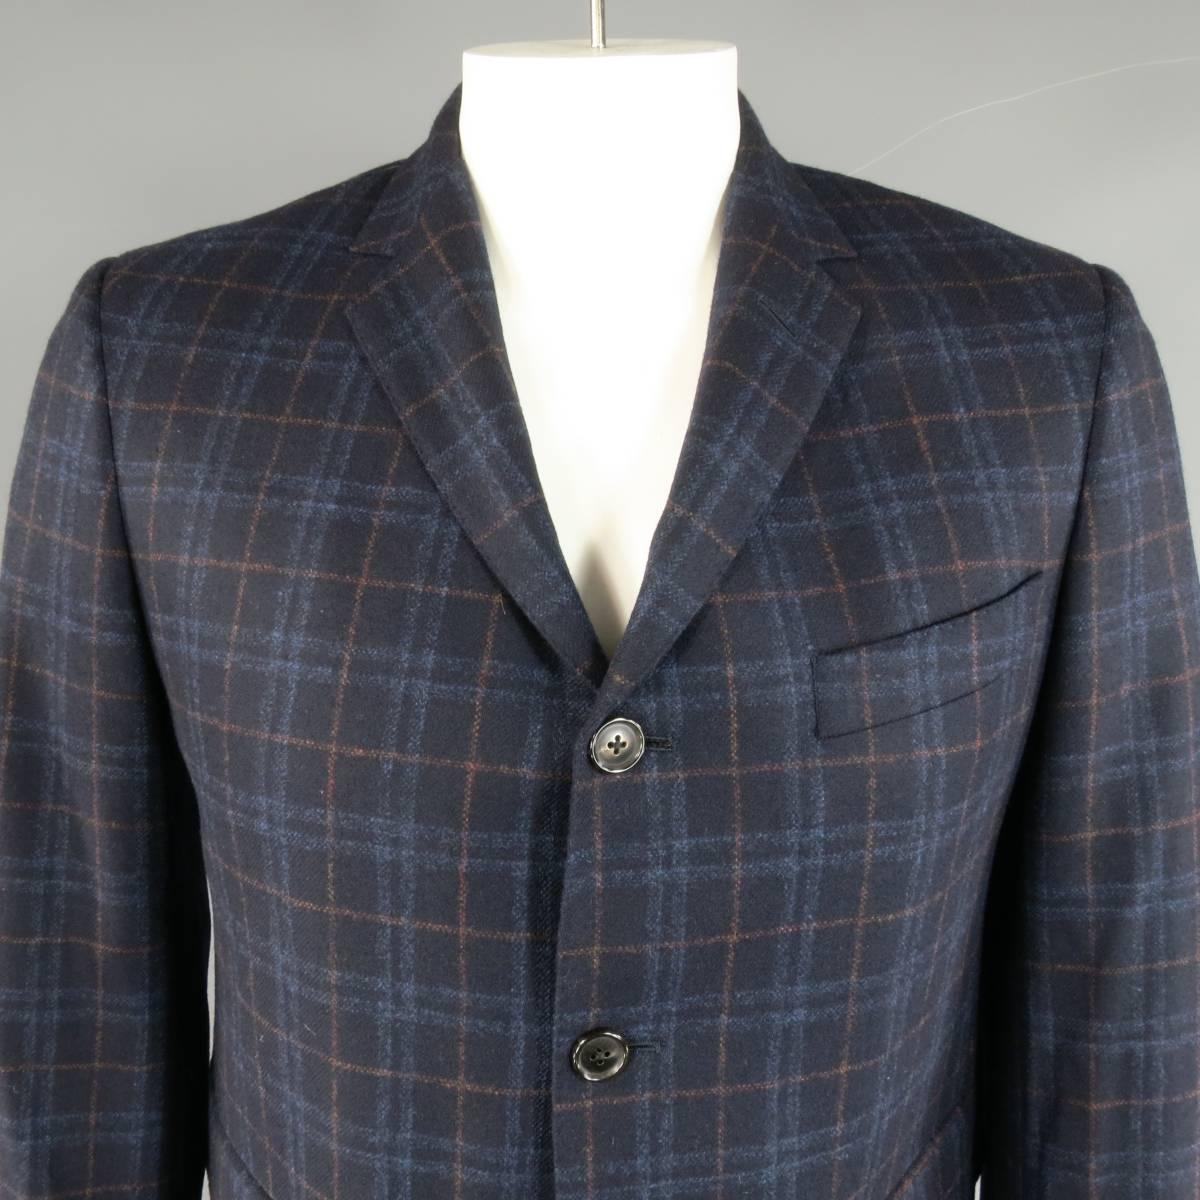 BRAND NEW BLACK FLEECE Sport Coat consists of wool/ cashmere material in a navy color tone. Designed in a 2-button front, notch lapel collar, top pocket square and bottom flap. Detailed plaid pattern throughout body with red accent and double back